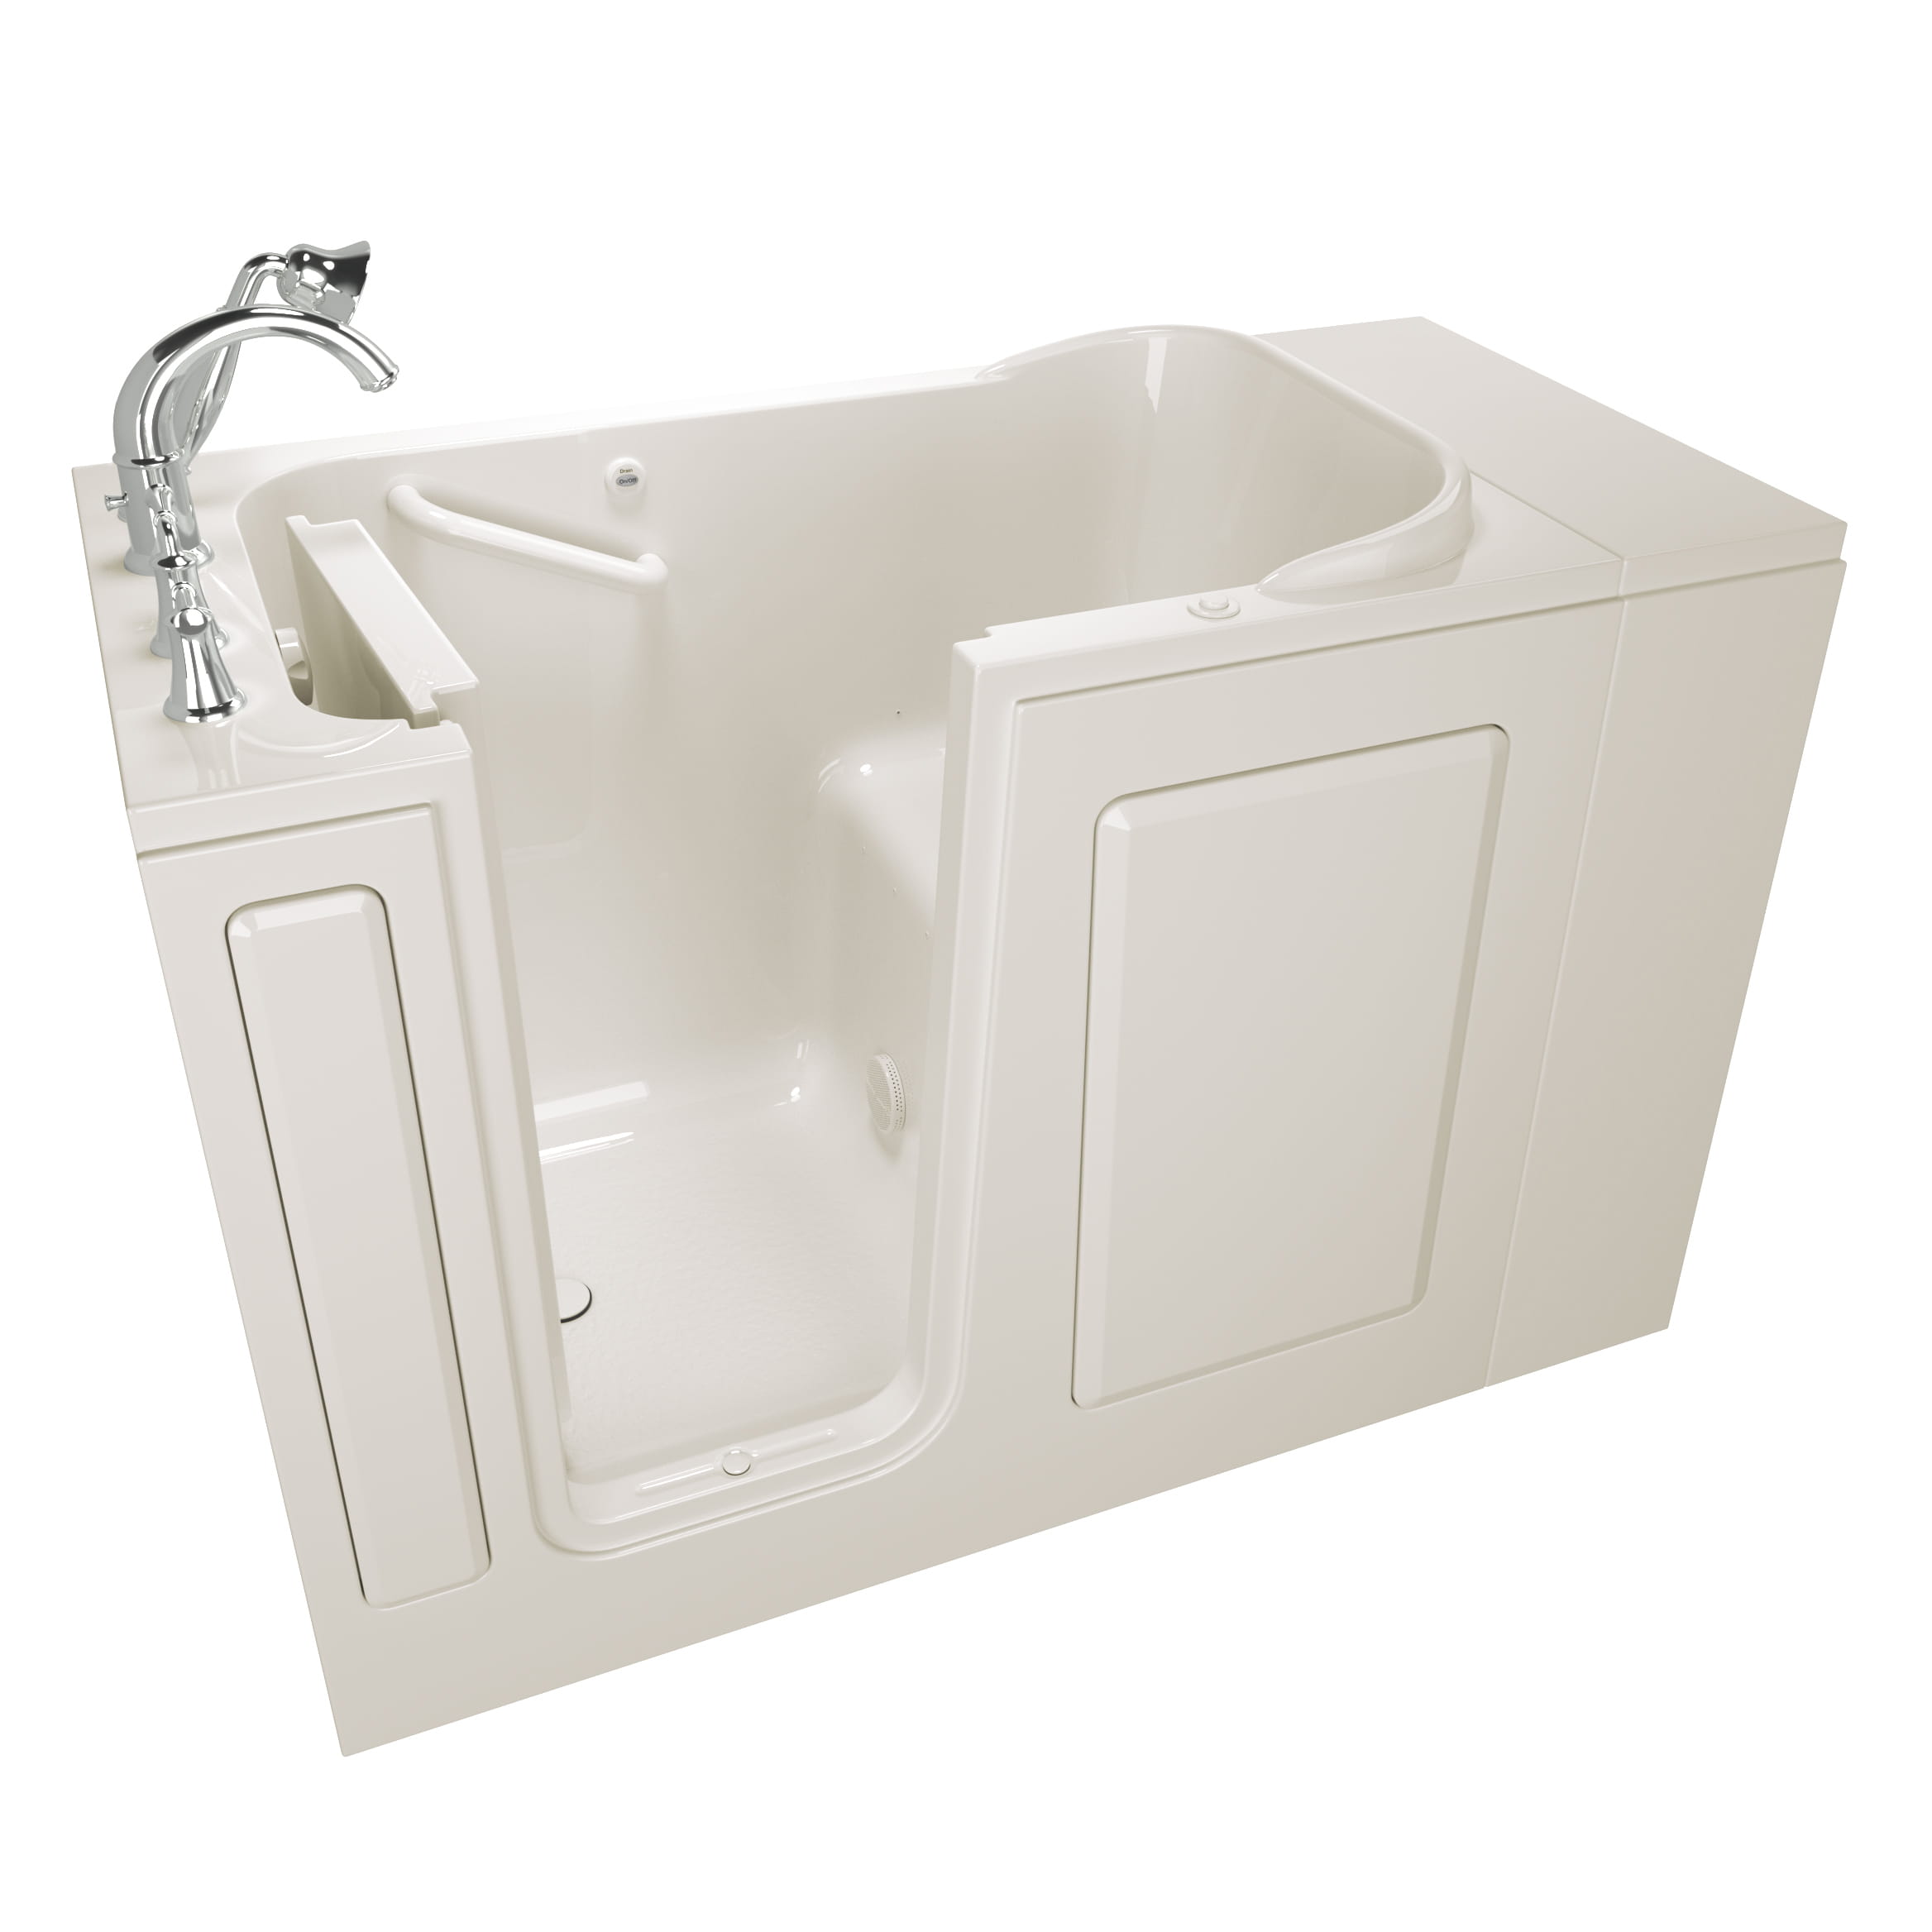 Gelcoat Value Series 28 x 48-Inch Walk-in Tub With Air Spa System - Left-Hand Drain With Faucet